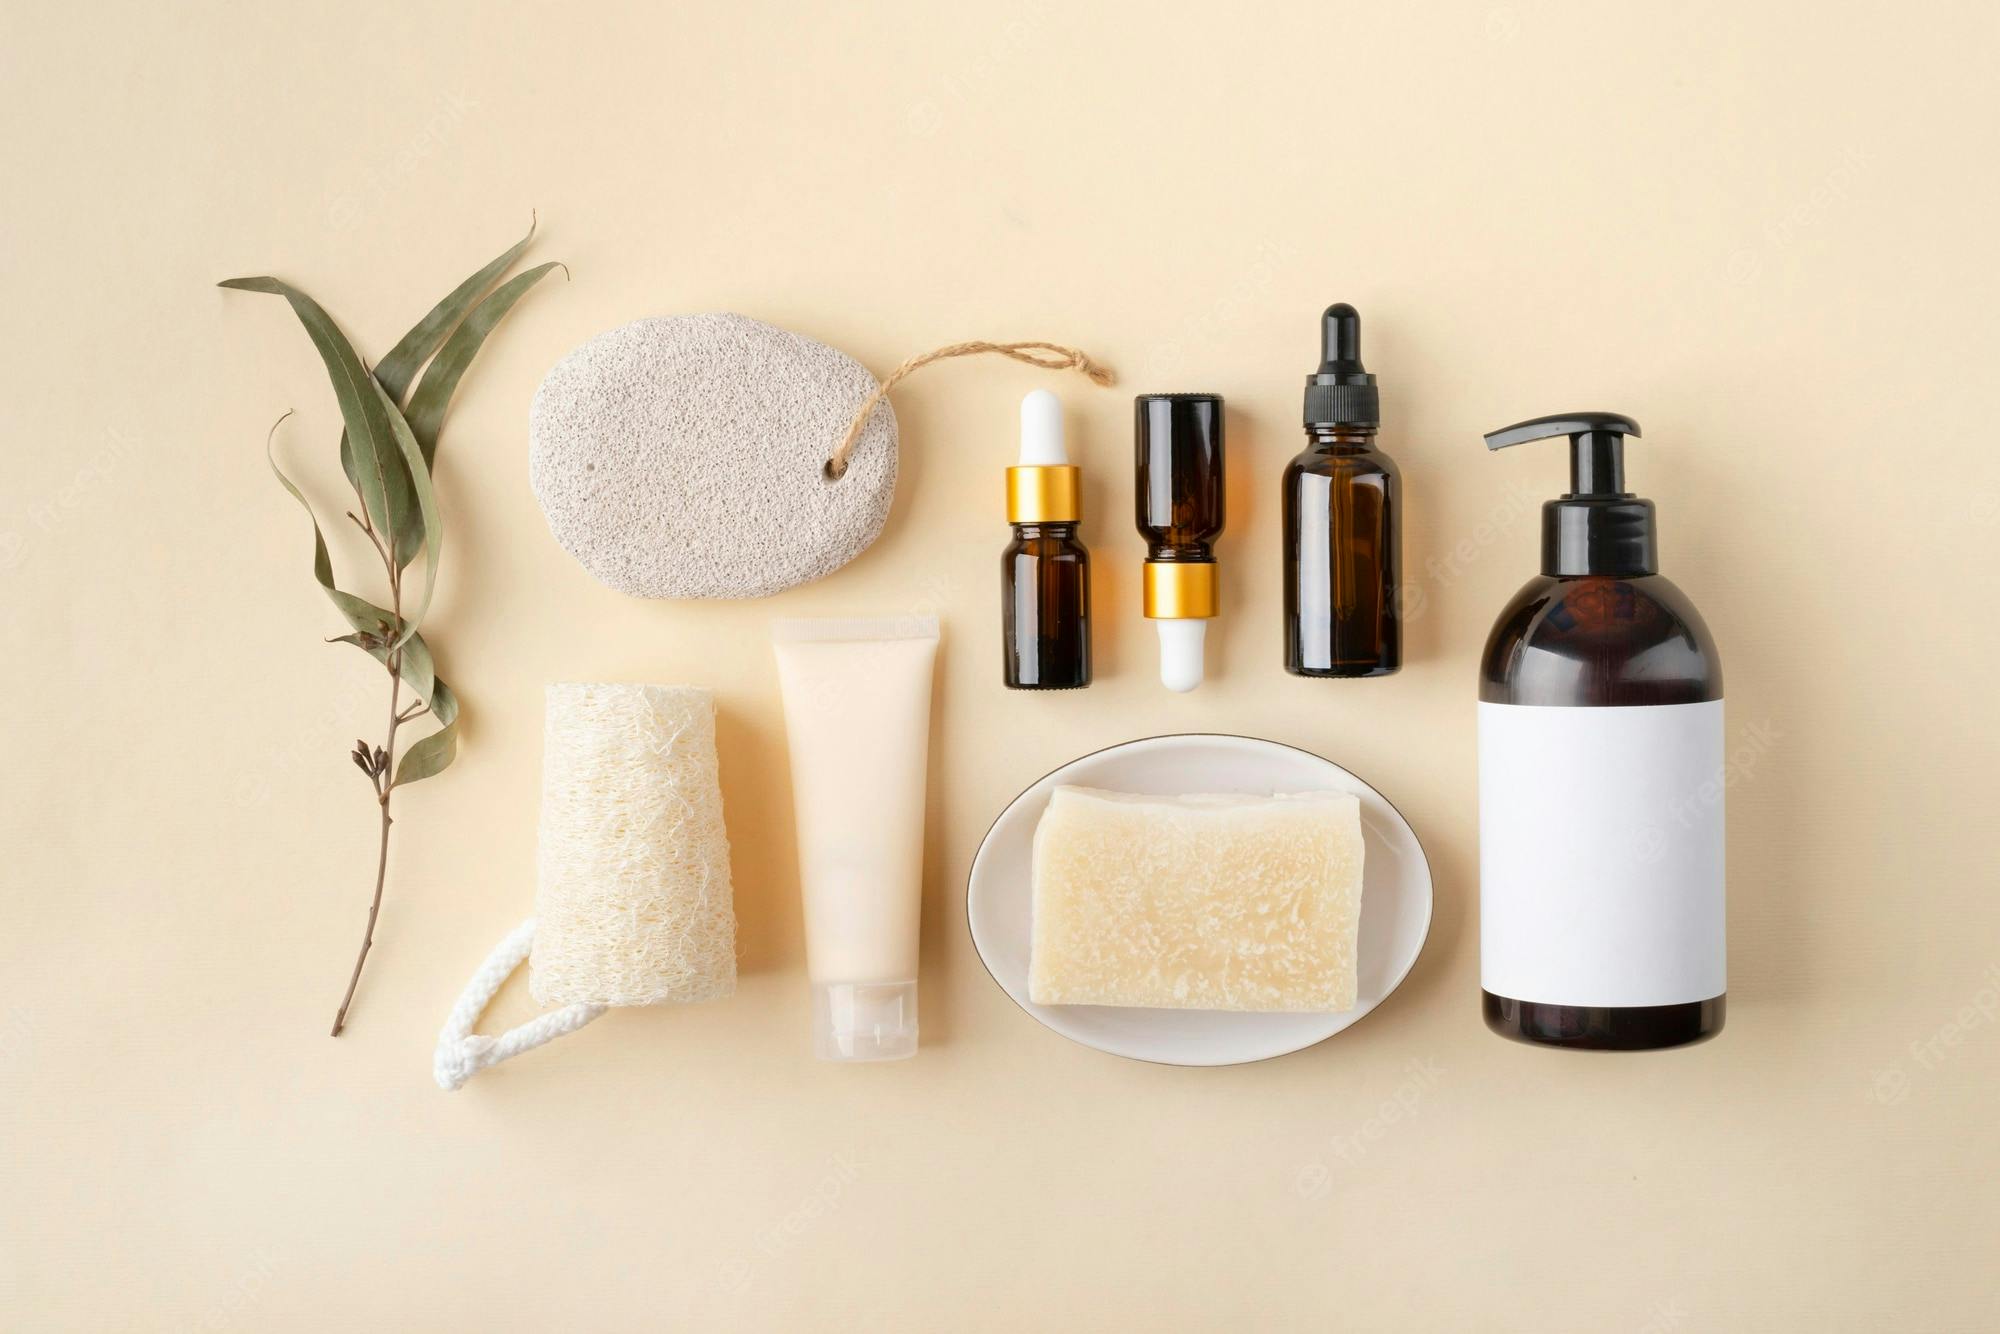 flat-lay-natural-self-care-products-composition_23-2148990019.jpg